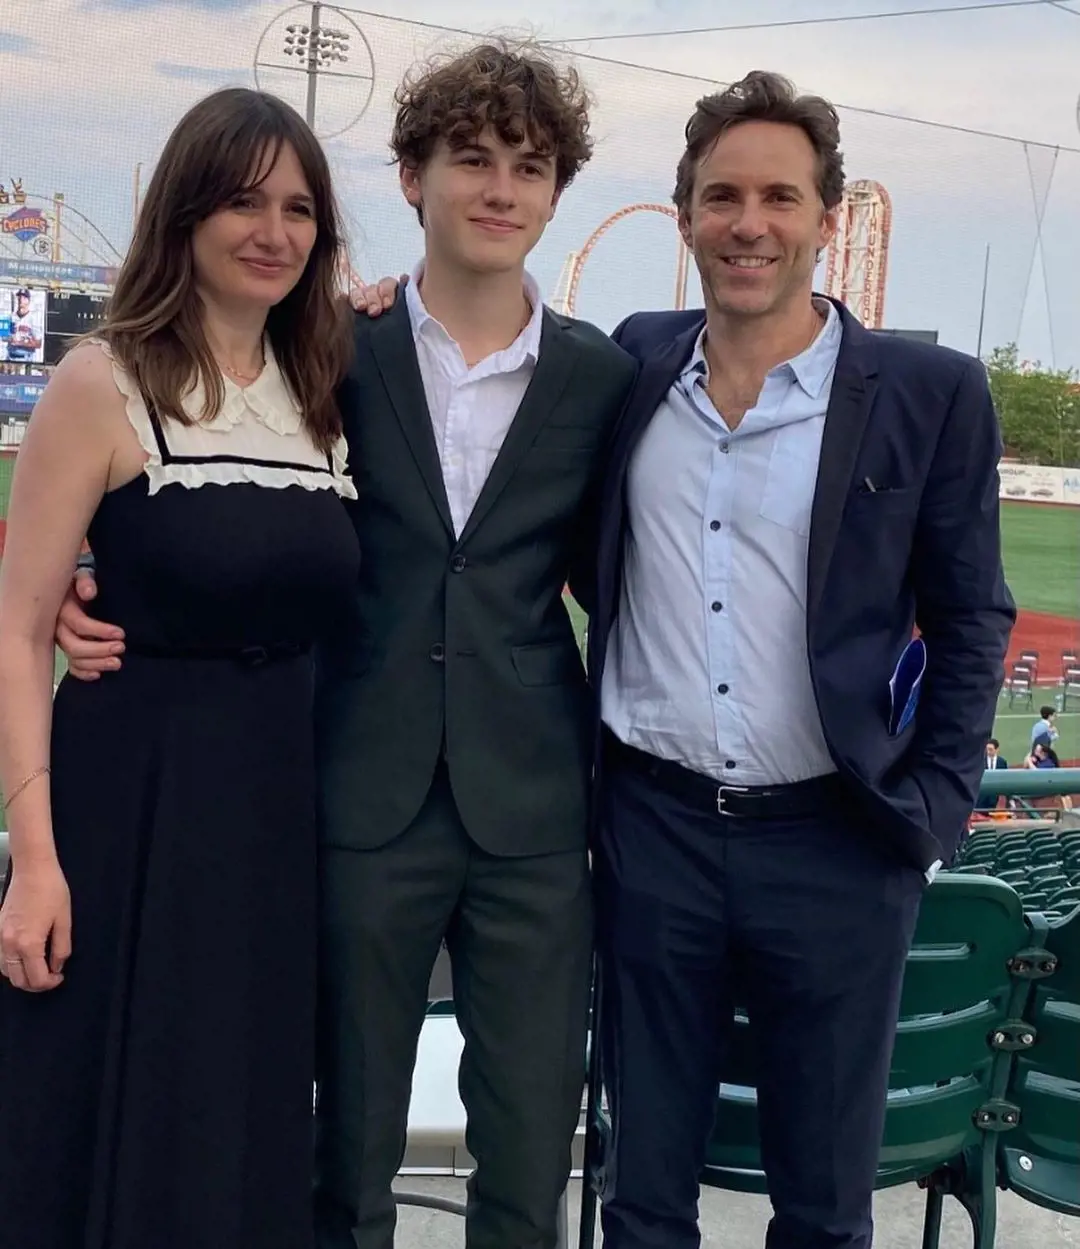 Emily and Alessandro at their son's graduation ceremony on June 8, 2021